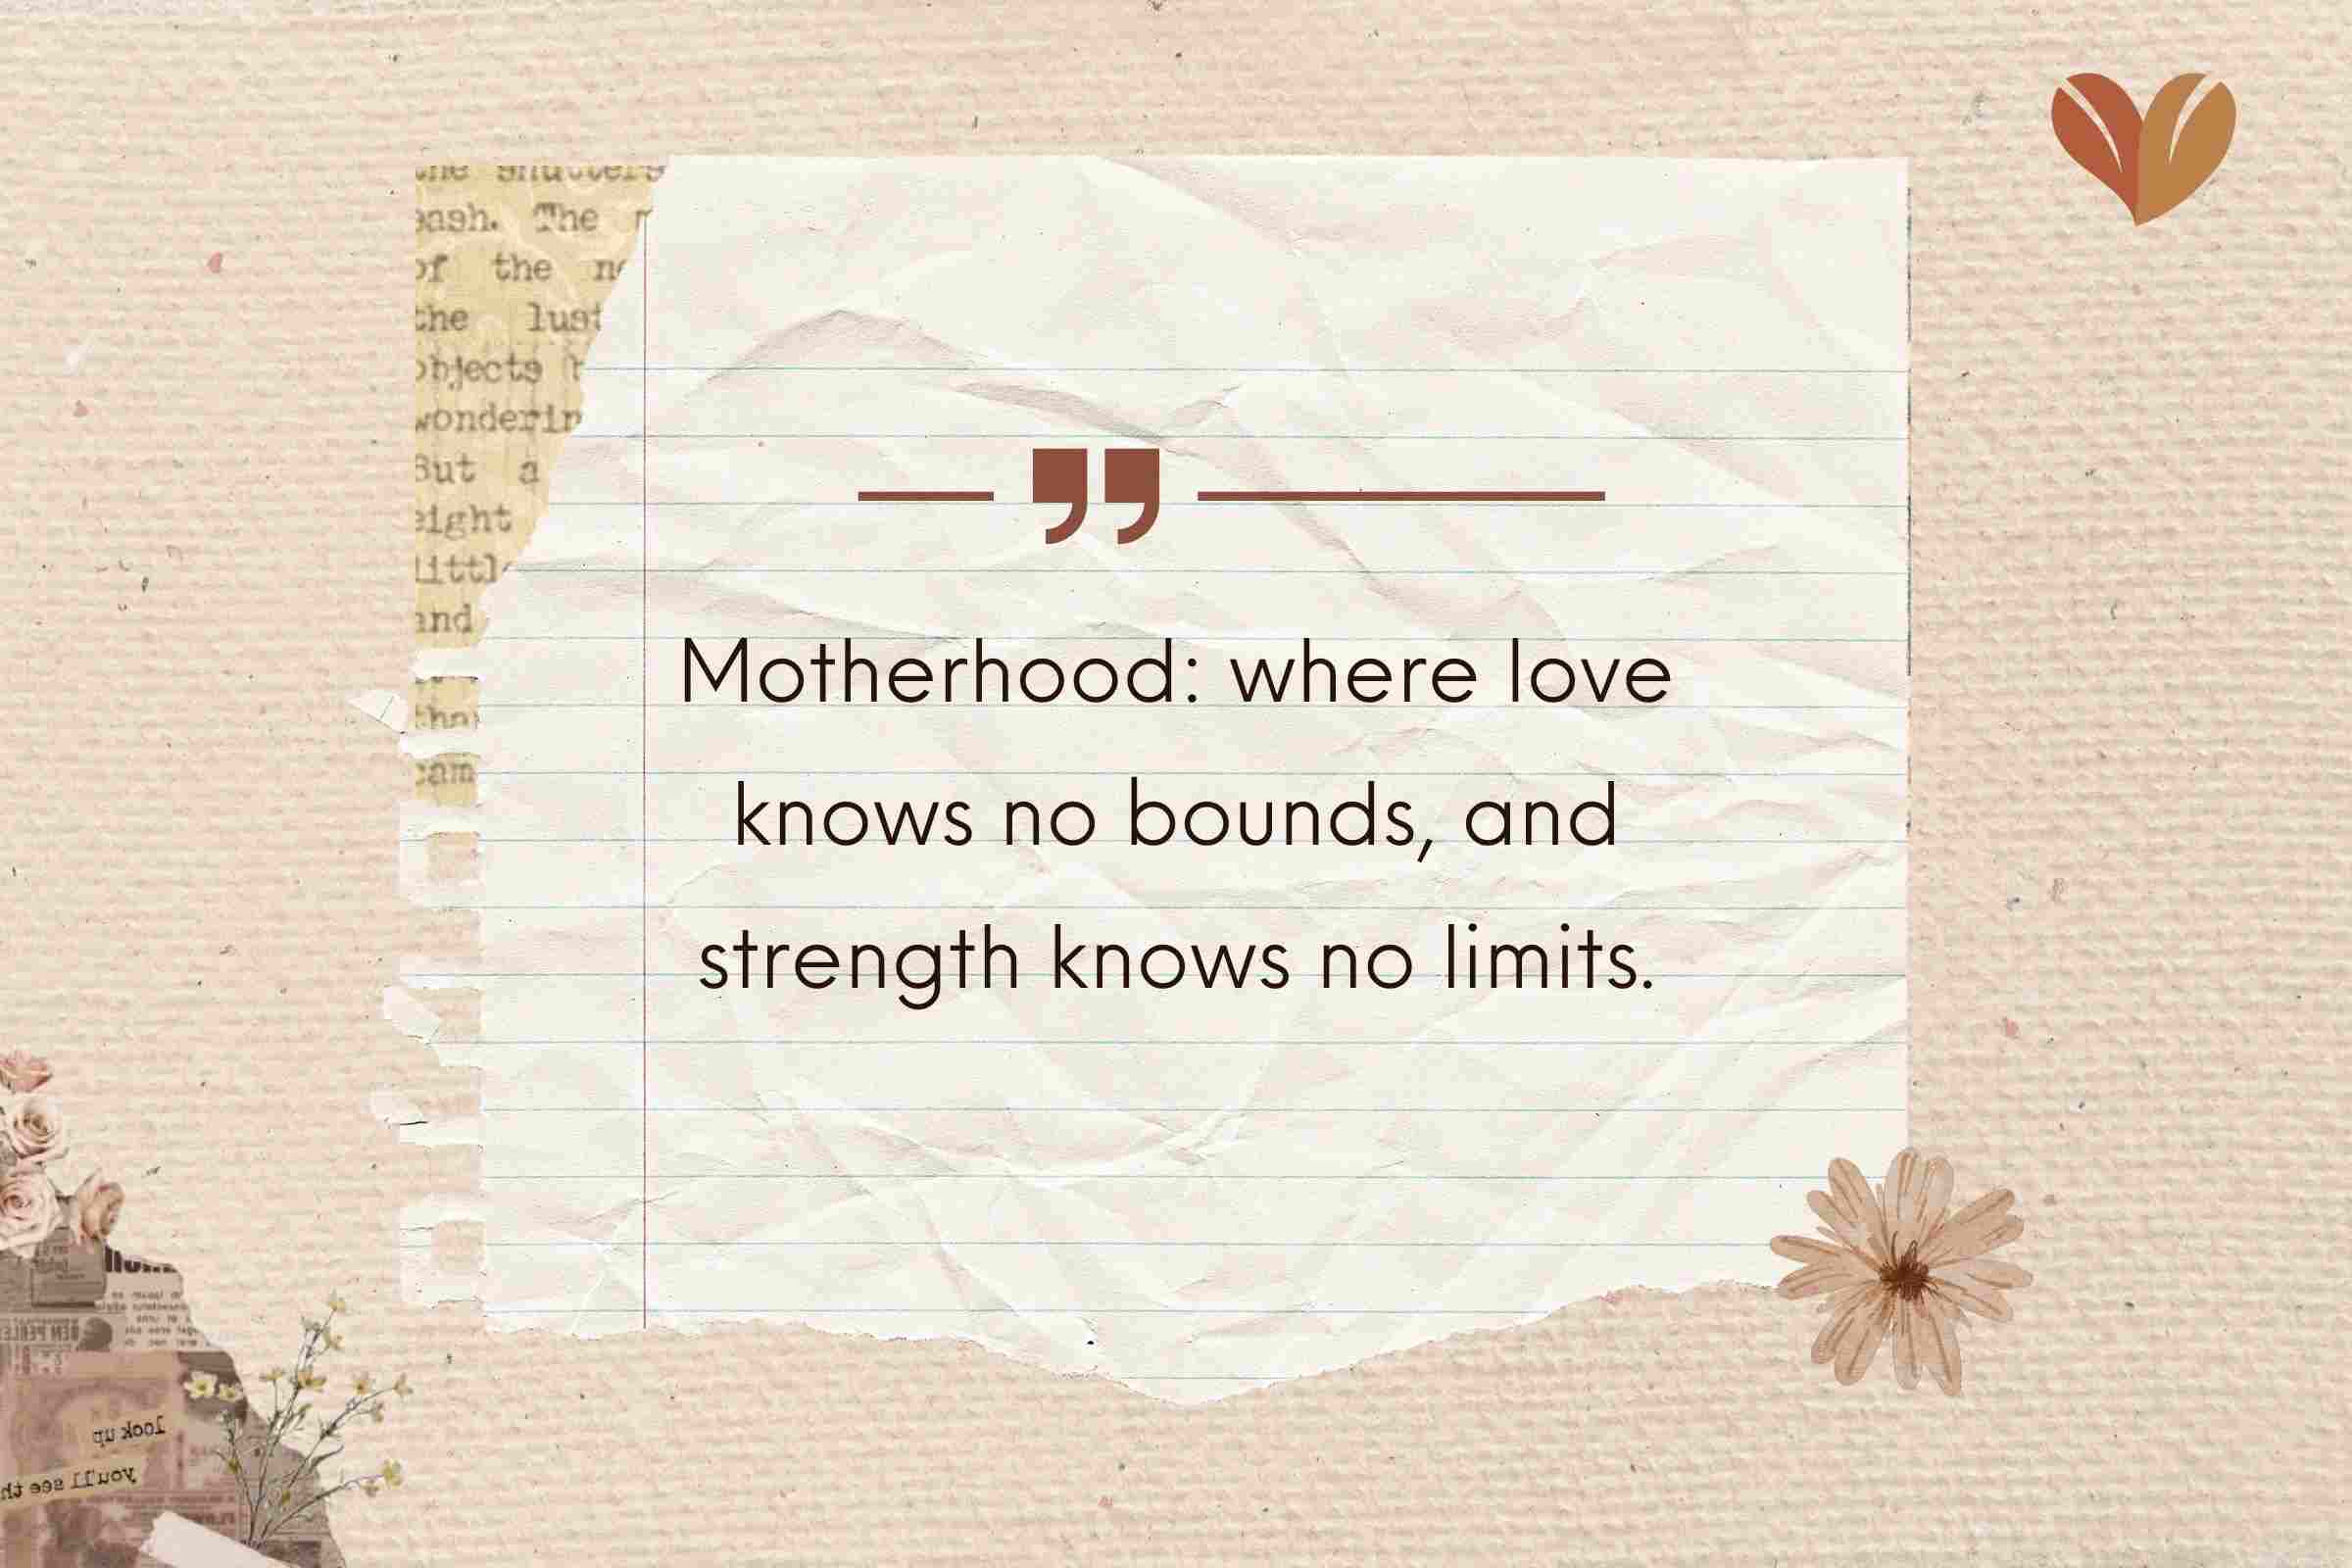 Motherhood: where love knows no bounds, and strength knows no limits